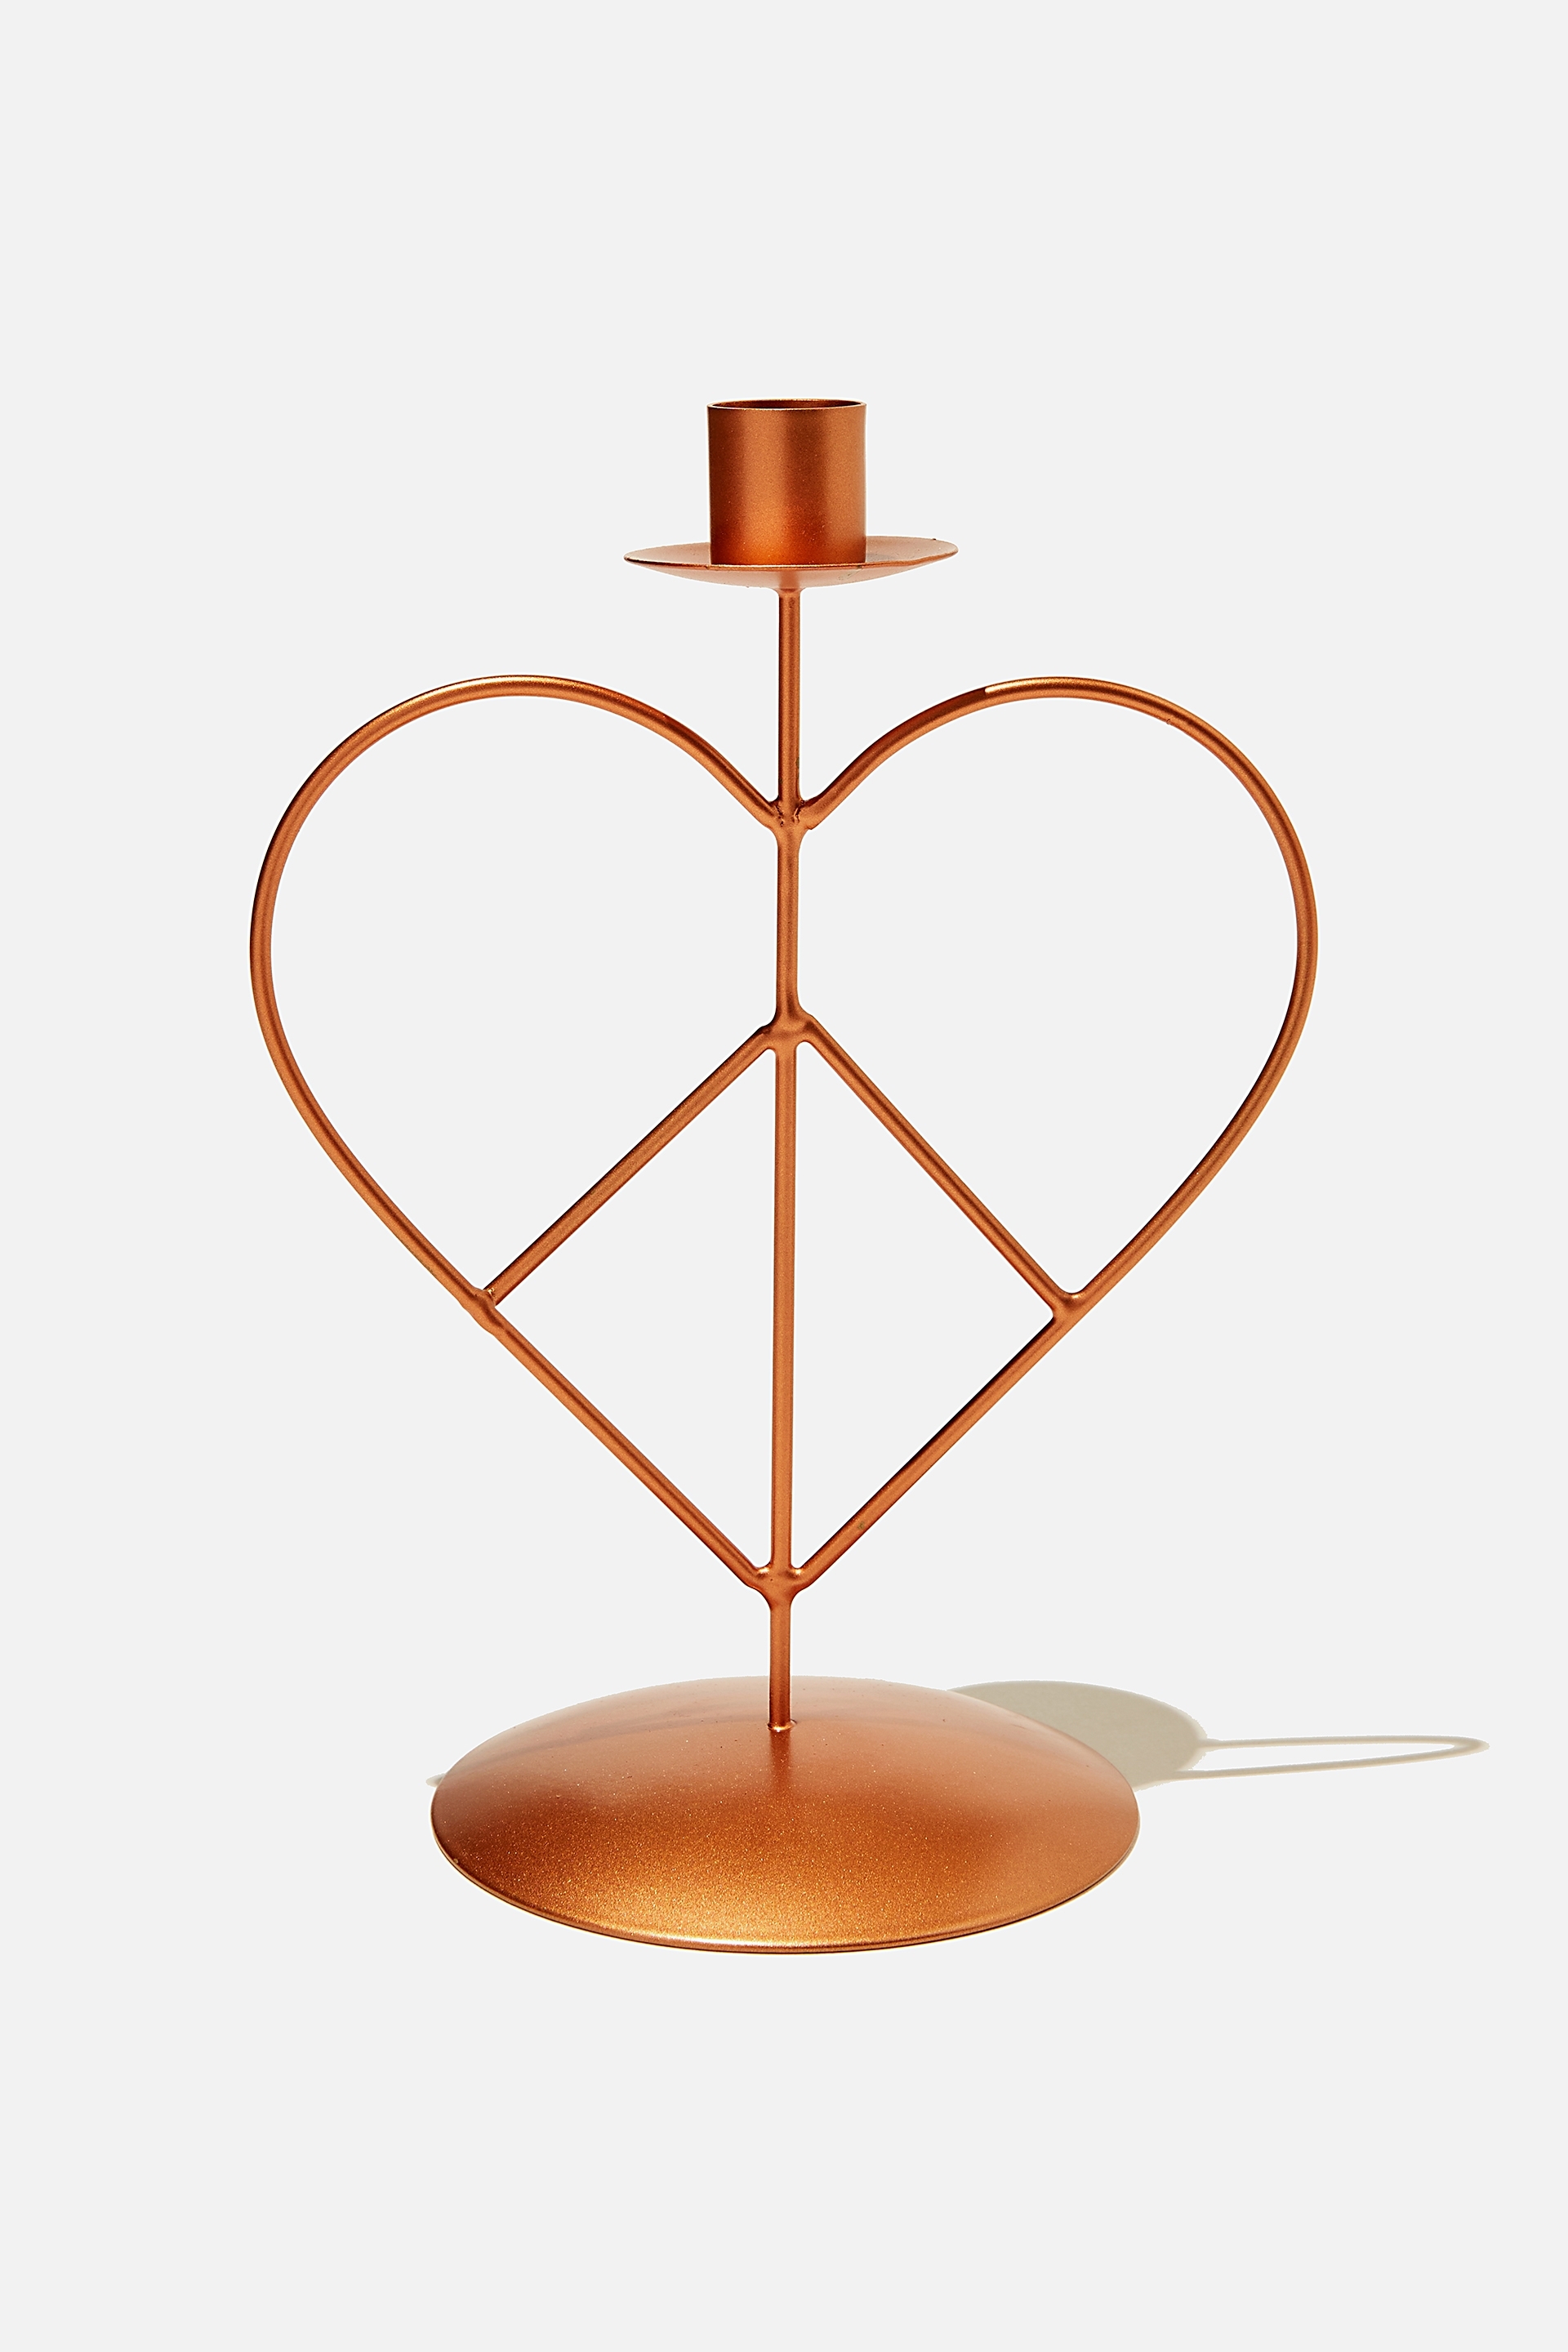 Typo - Metal Shaped Candle Holder - Rose gold heart